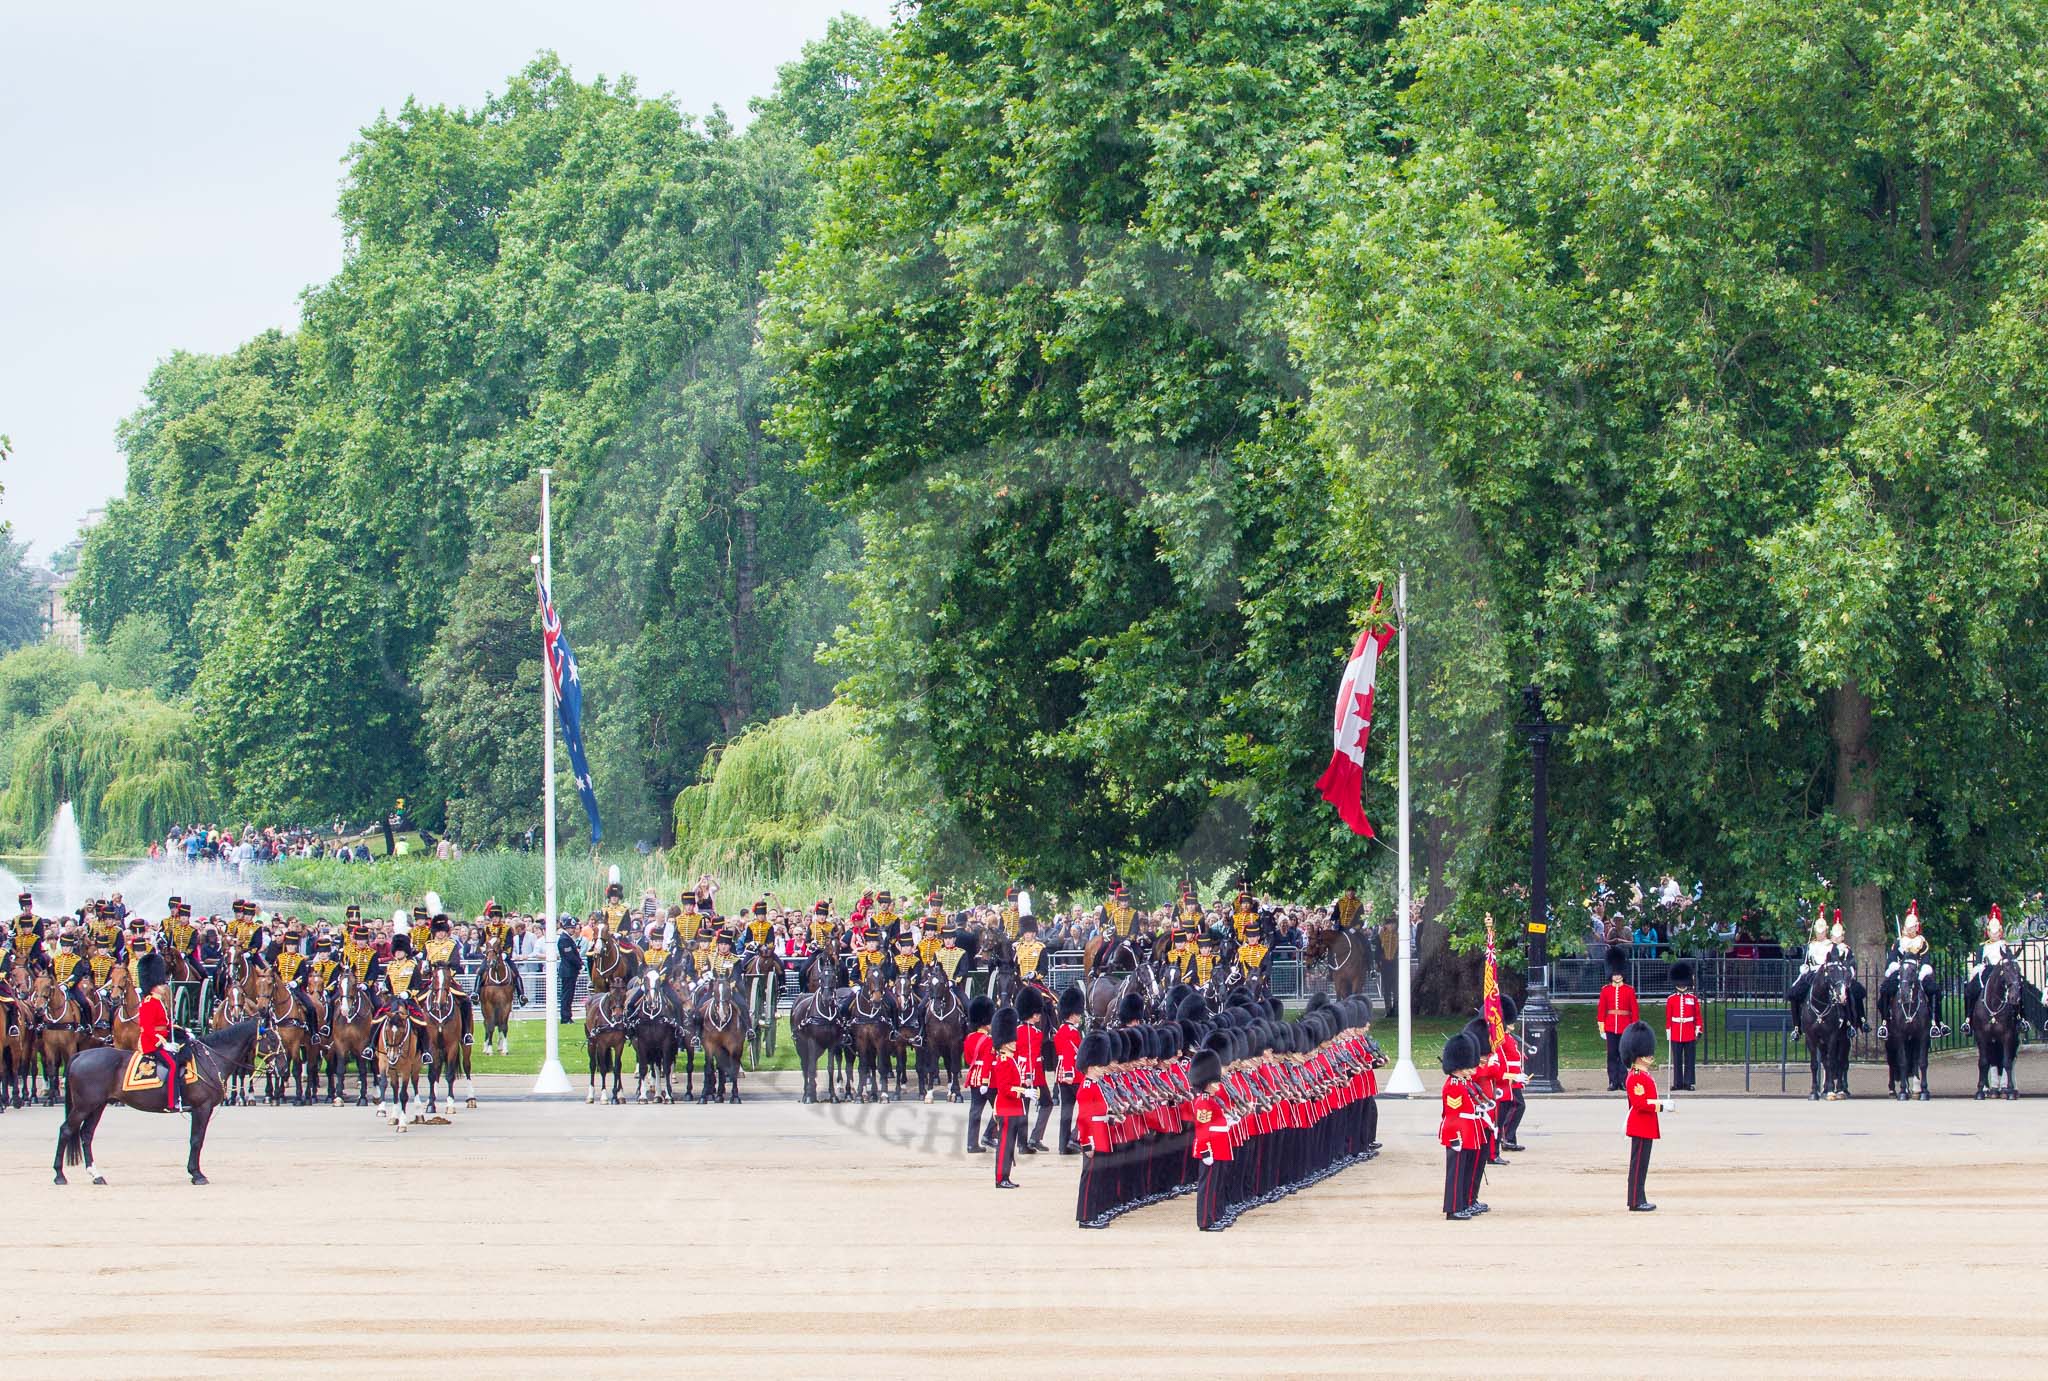 Trooping the Colour 2014.
Horse Guards Parade, Westminster,
London SW1A,

United Kingdom,
on 14 June 2014 at 11:31, image #583